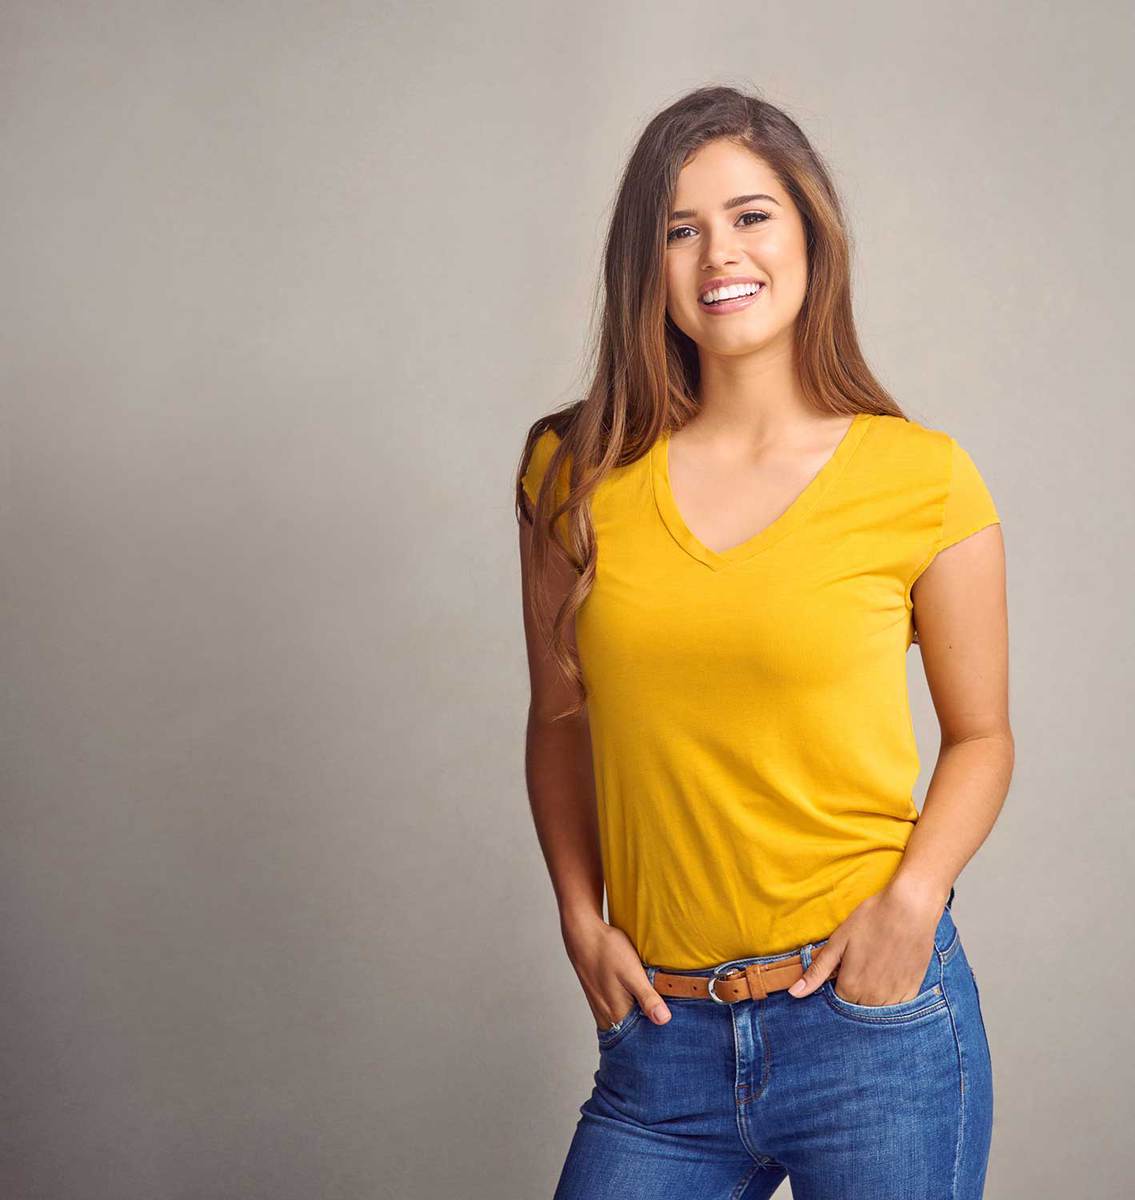 Attractive young woman wearing yellow shirt and jeans